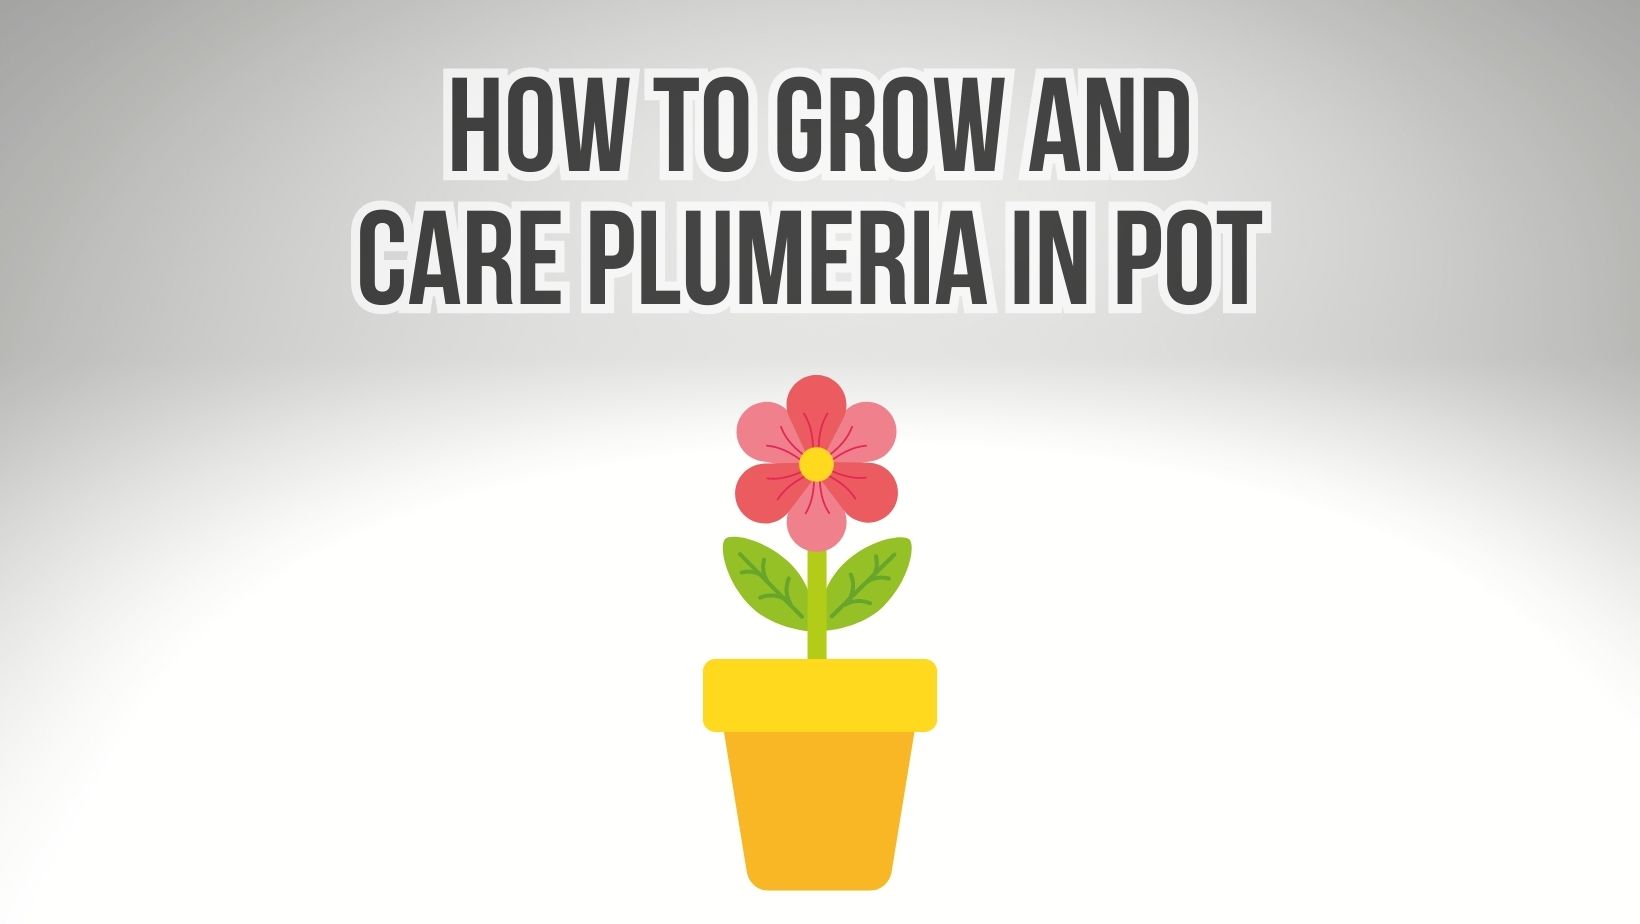 How To Grow and Care Plumeria In A Pot? Guide 101